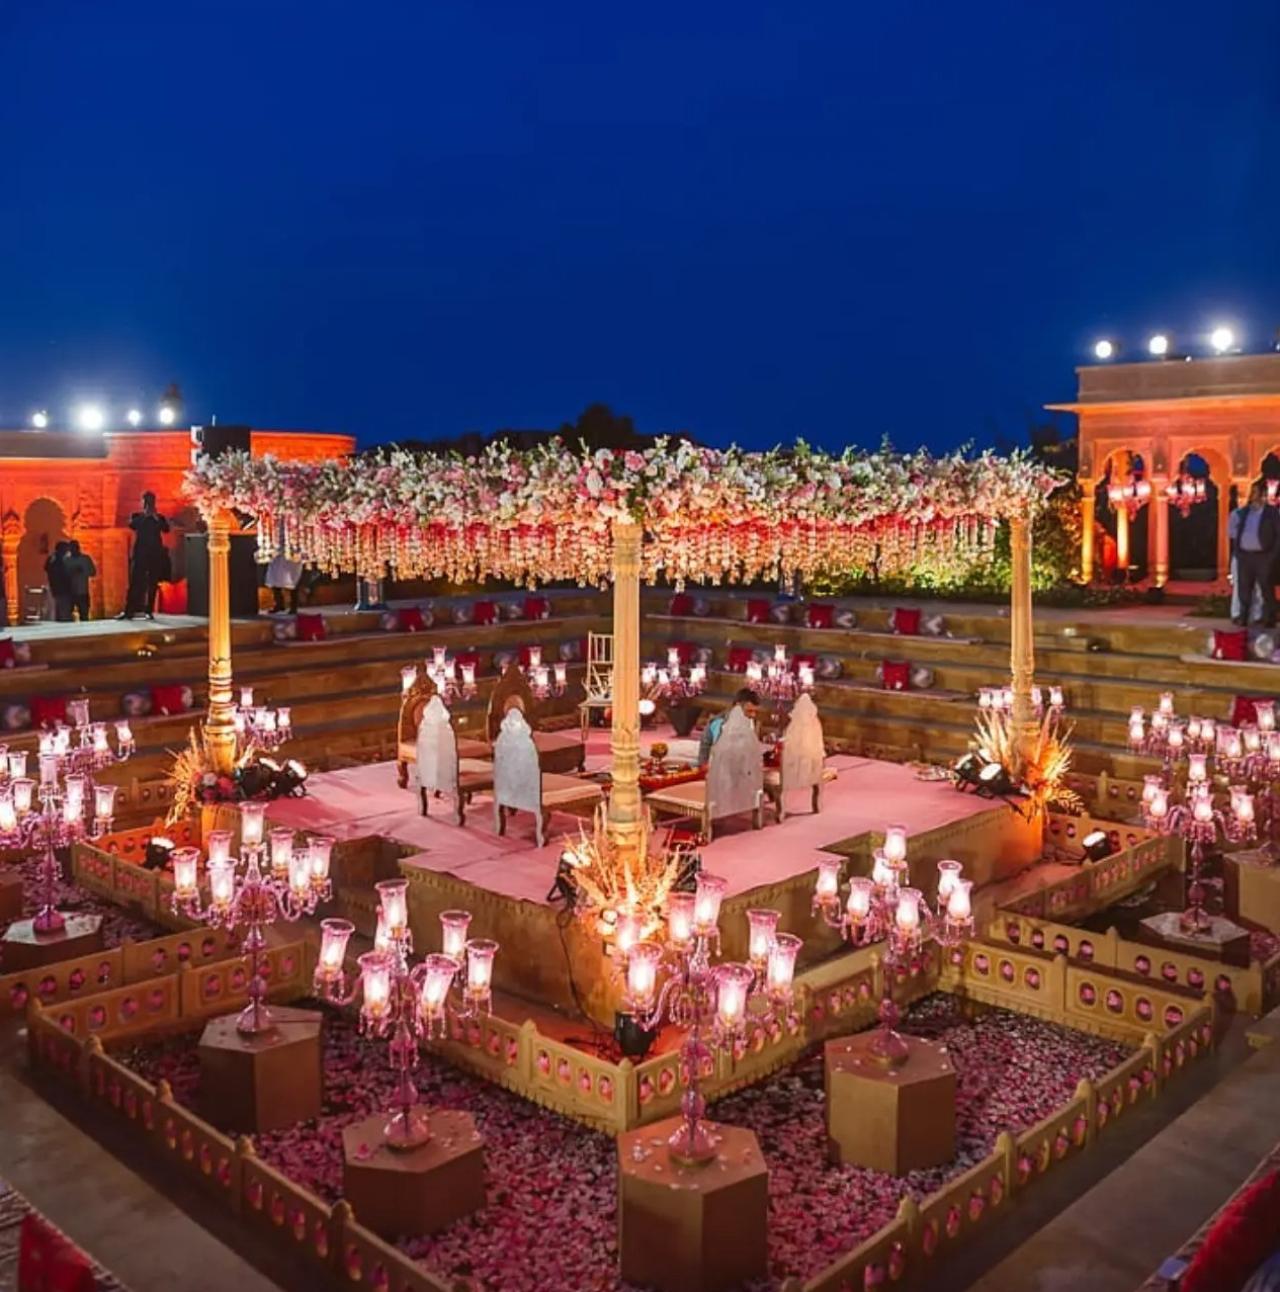 To give a royal look to the wedding, a special mandap has been decorated with indigenous and foreign flowers in Jaisalmer's Suryagarh palace hotel